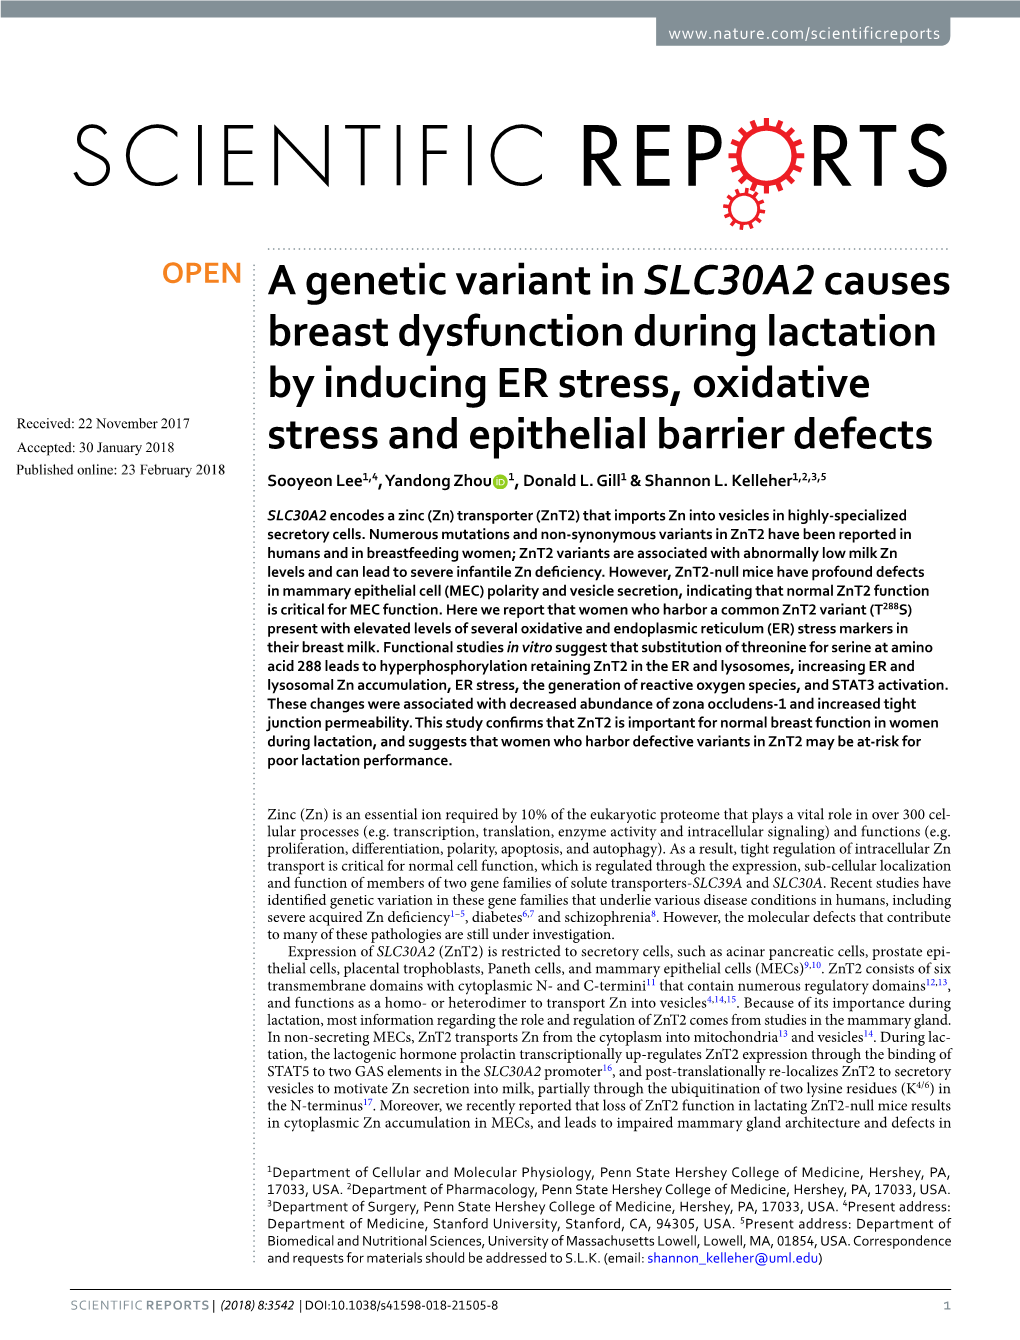 A Genetic Variant in SLC30A2 Causes Breast Dysfunction During Lactation